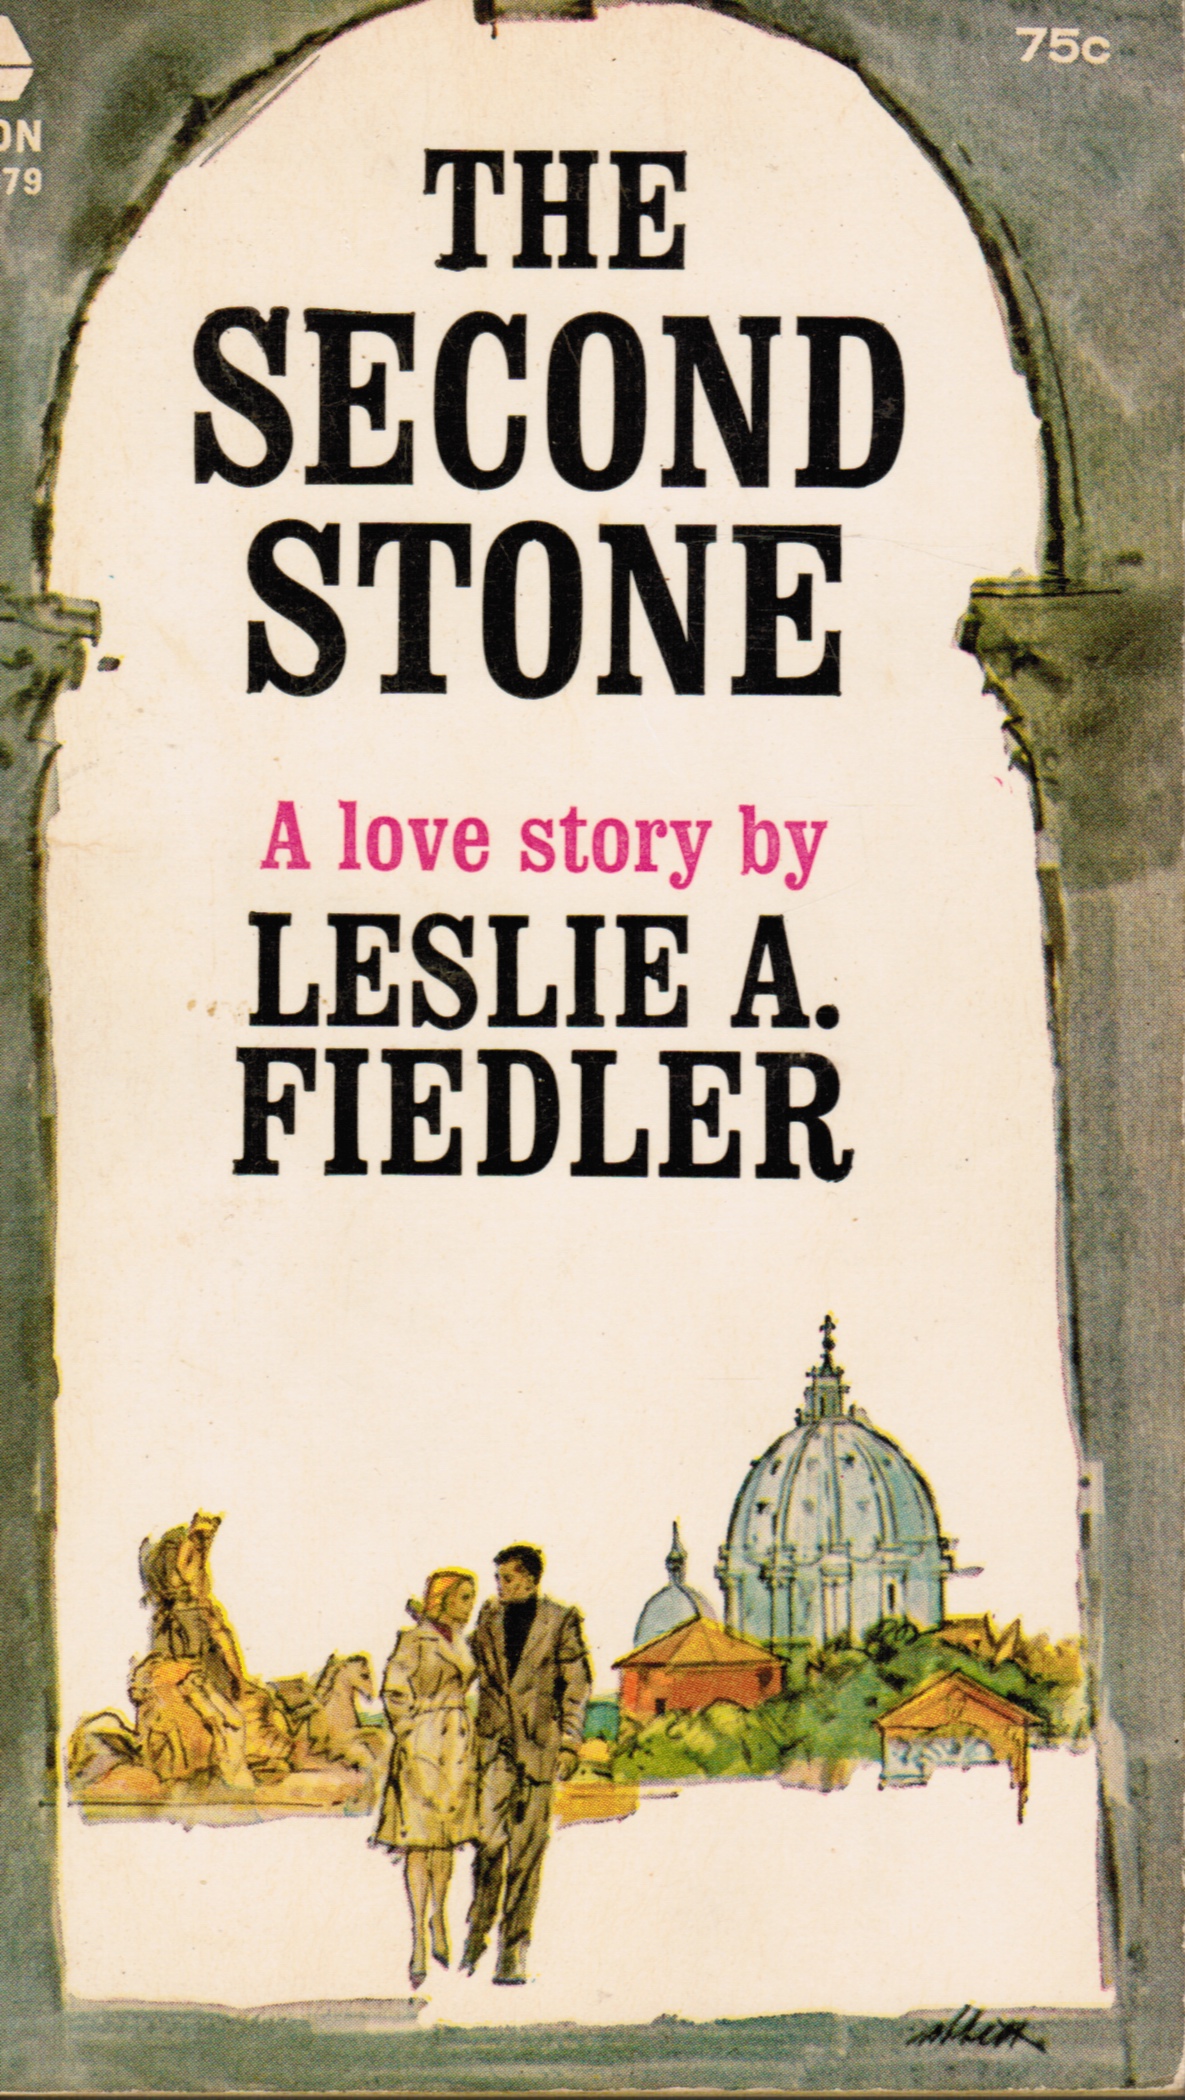 FIEDLER, LESLIE - The Second Stone